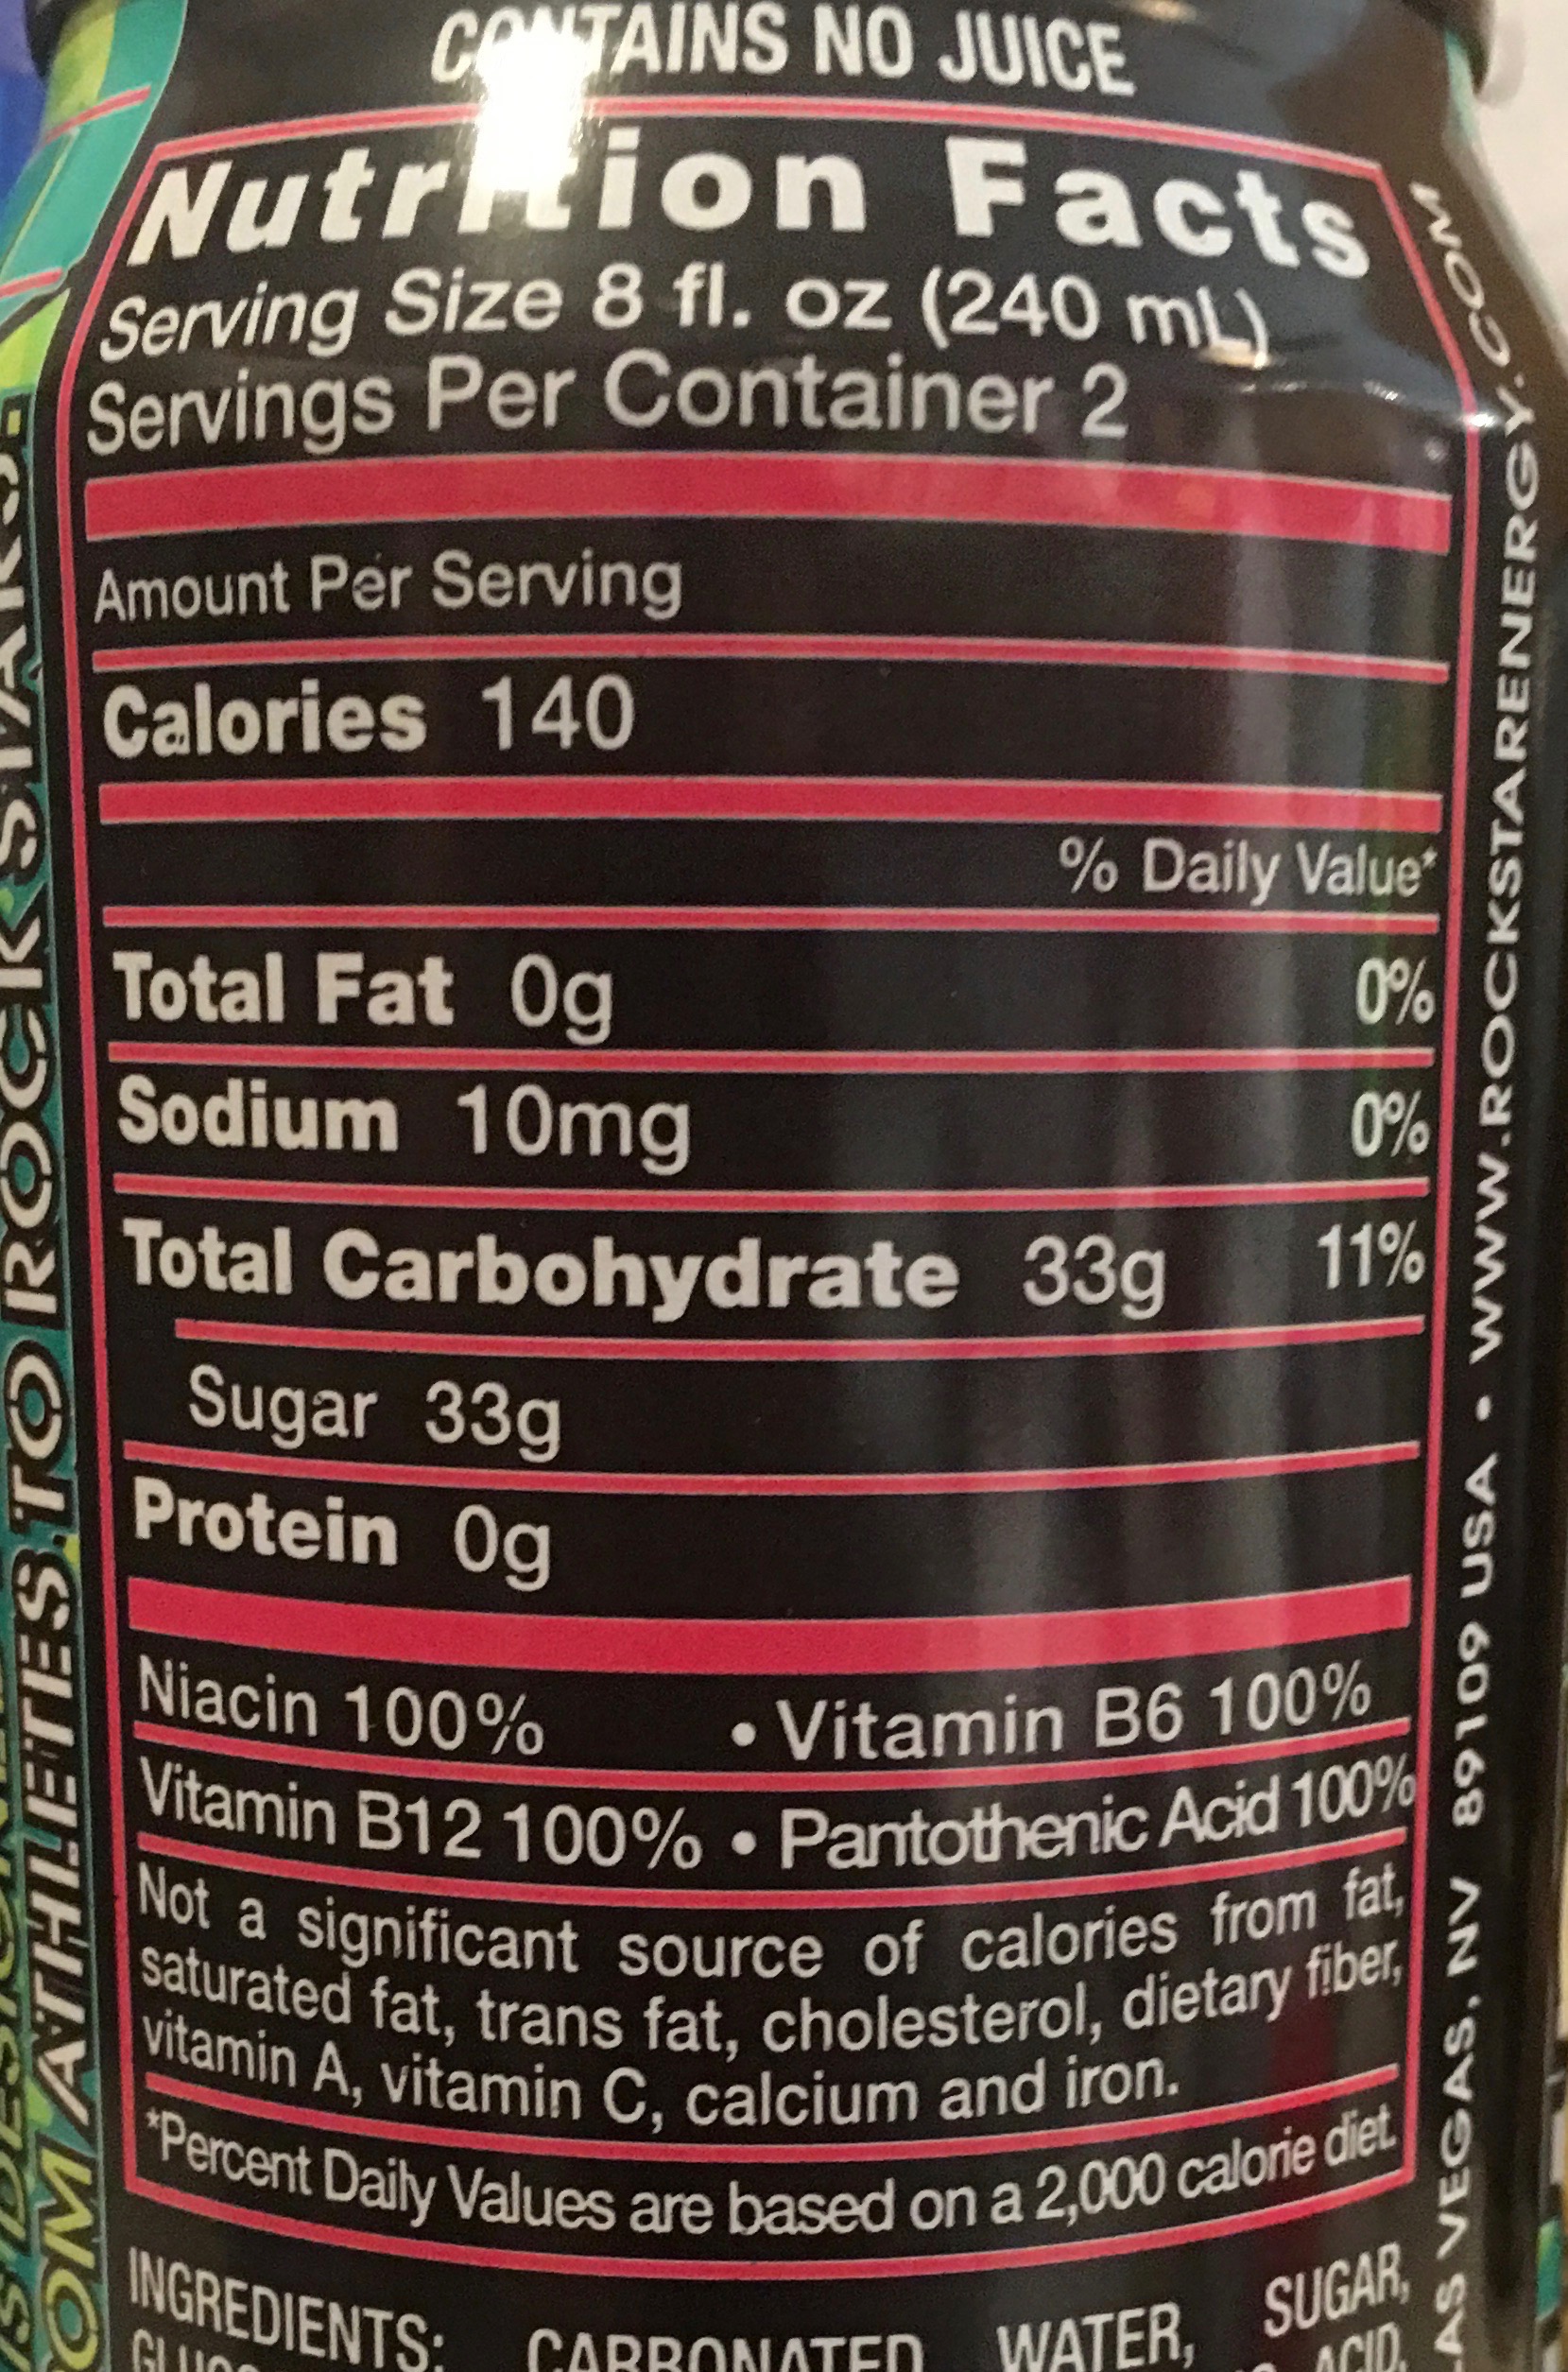 download full throttle drink nutrition facts